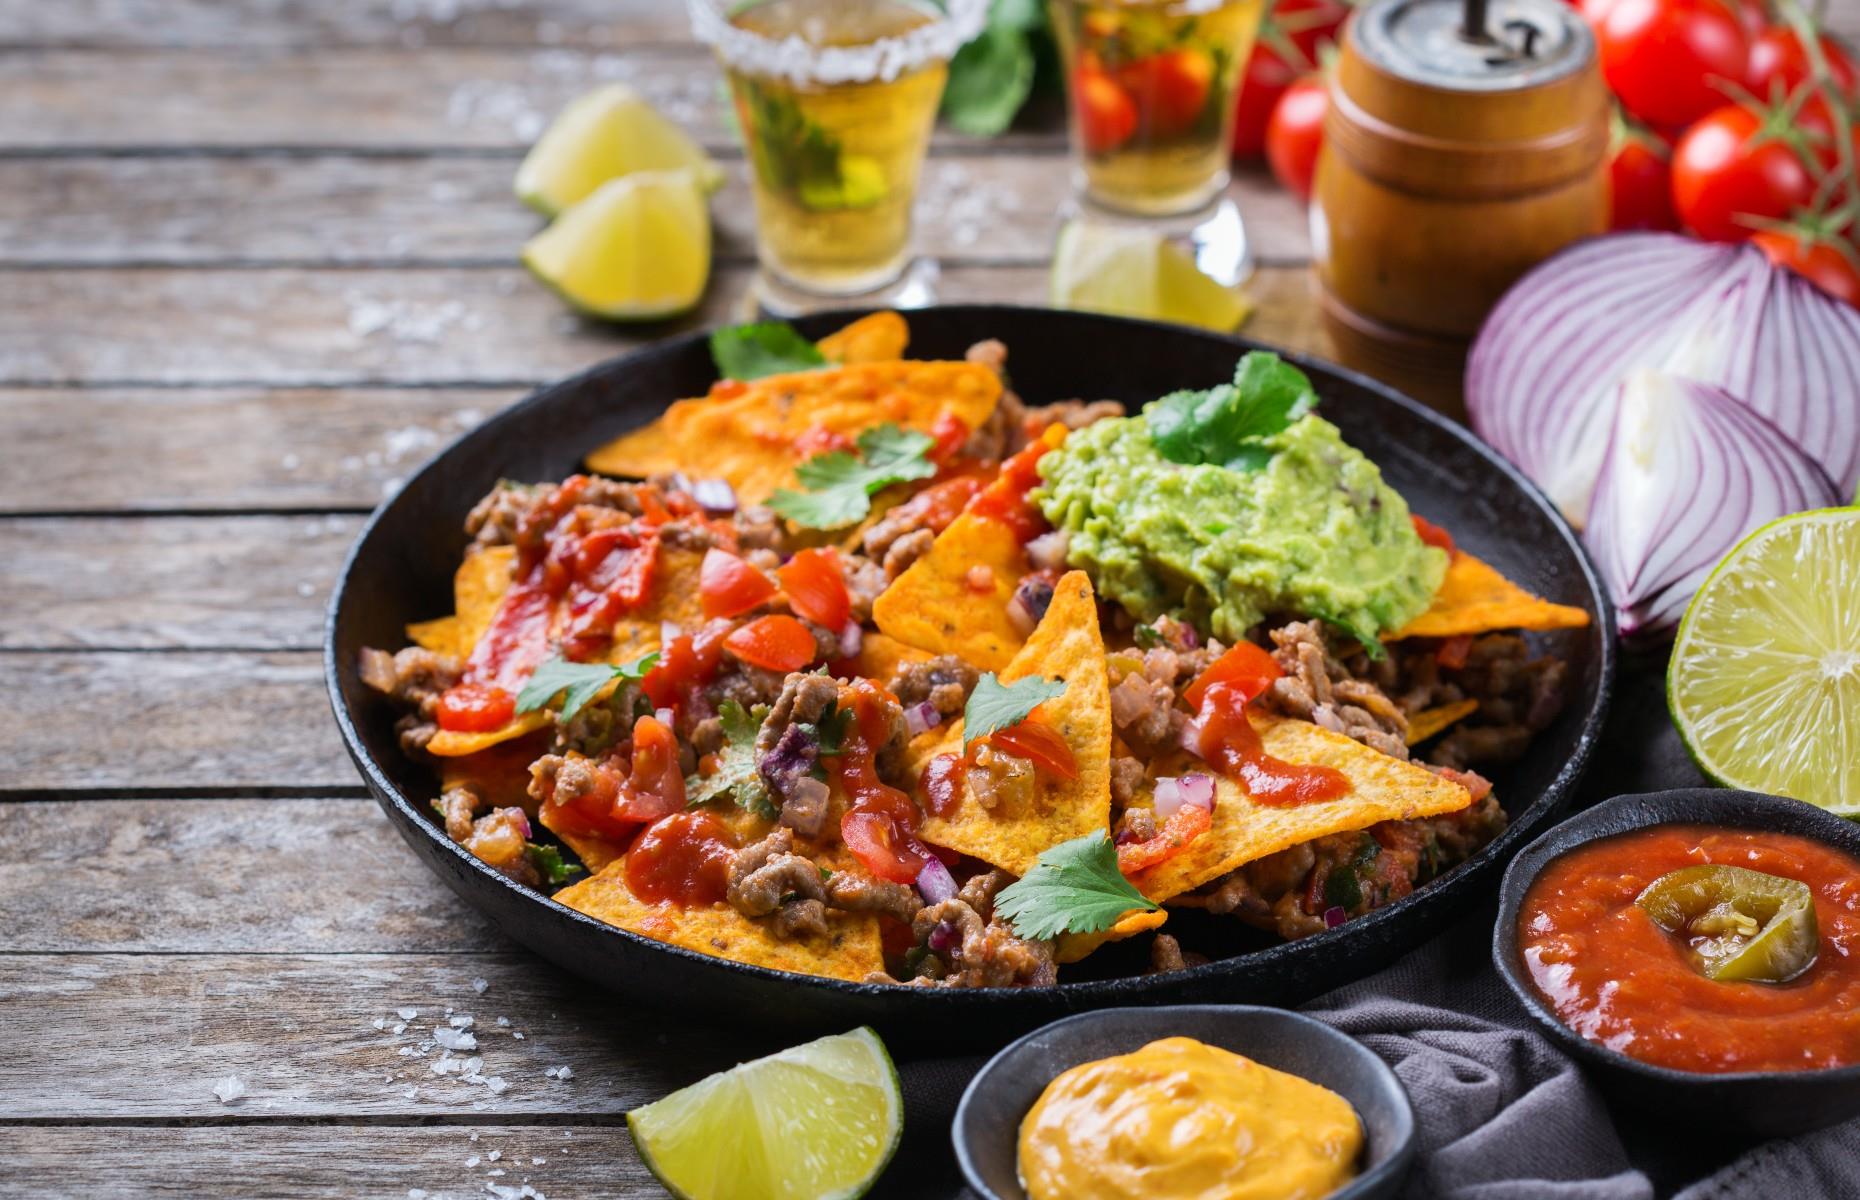 Upgrade your nachos with these tasty toppings